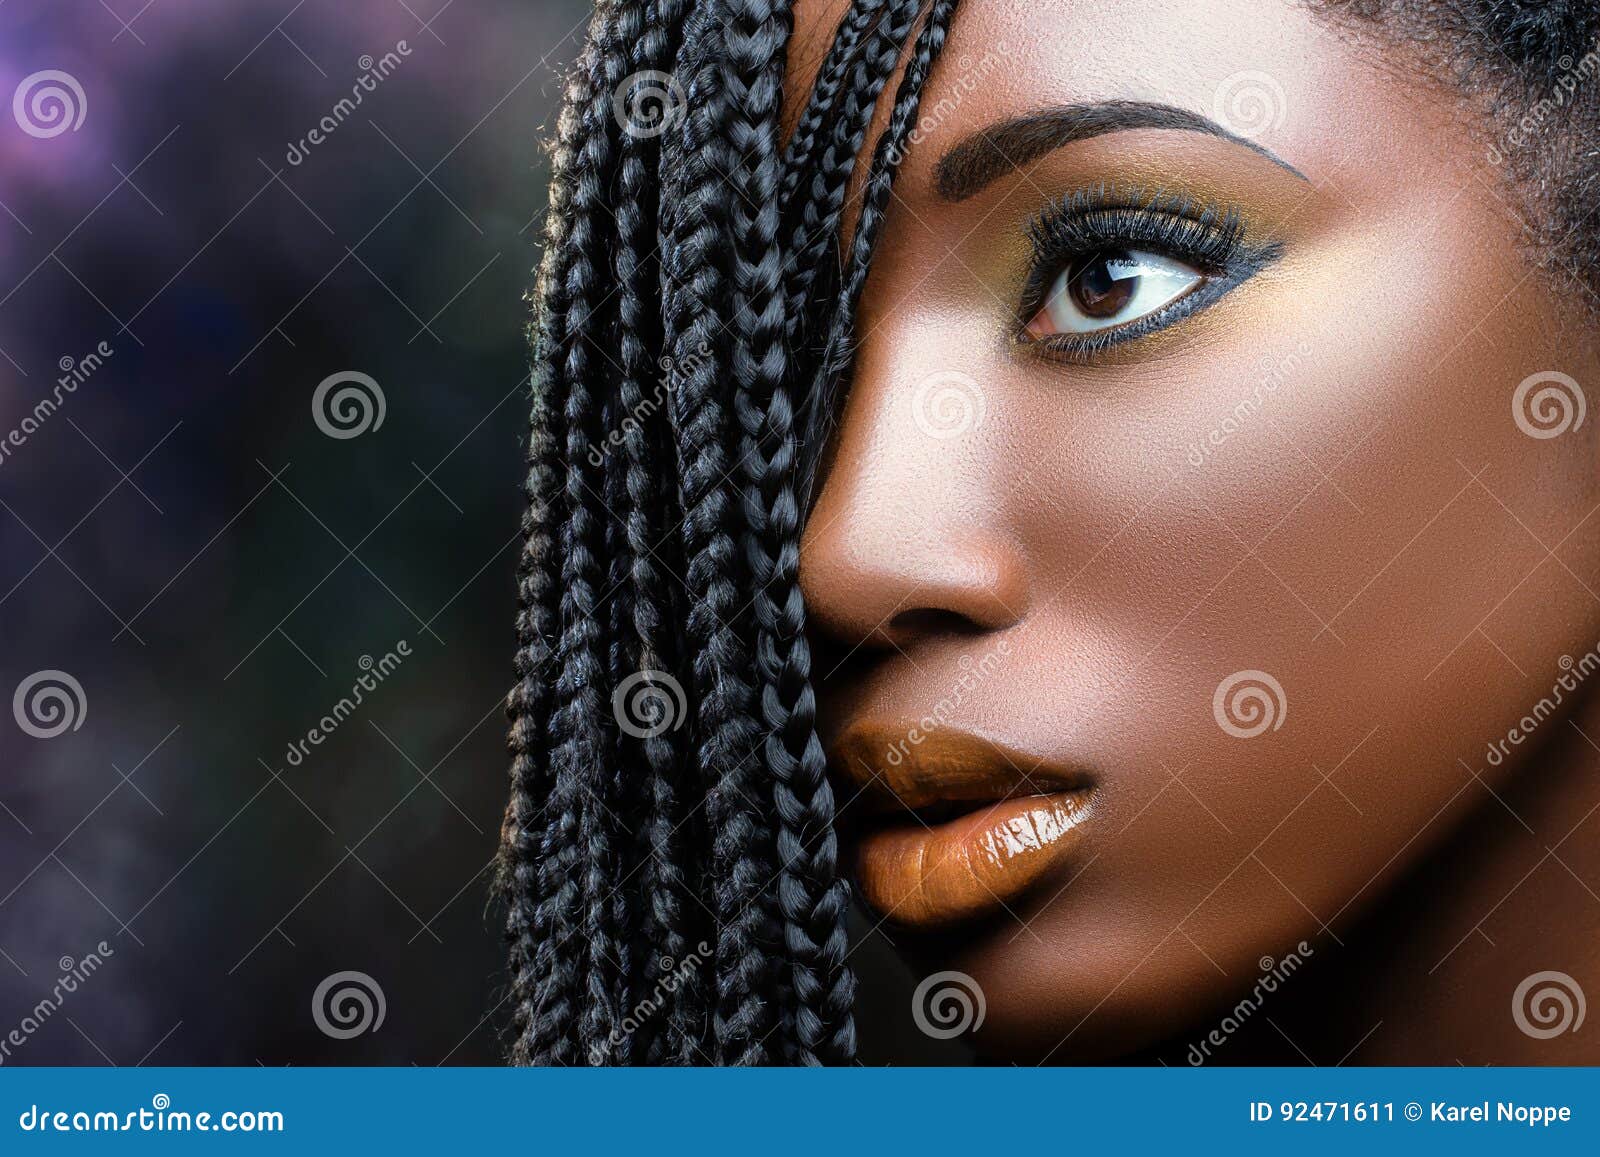 african beauty female face with braids .